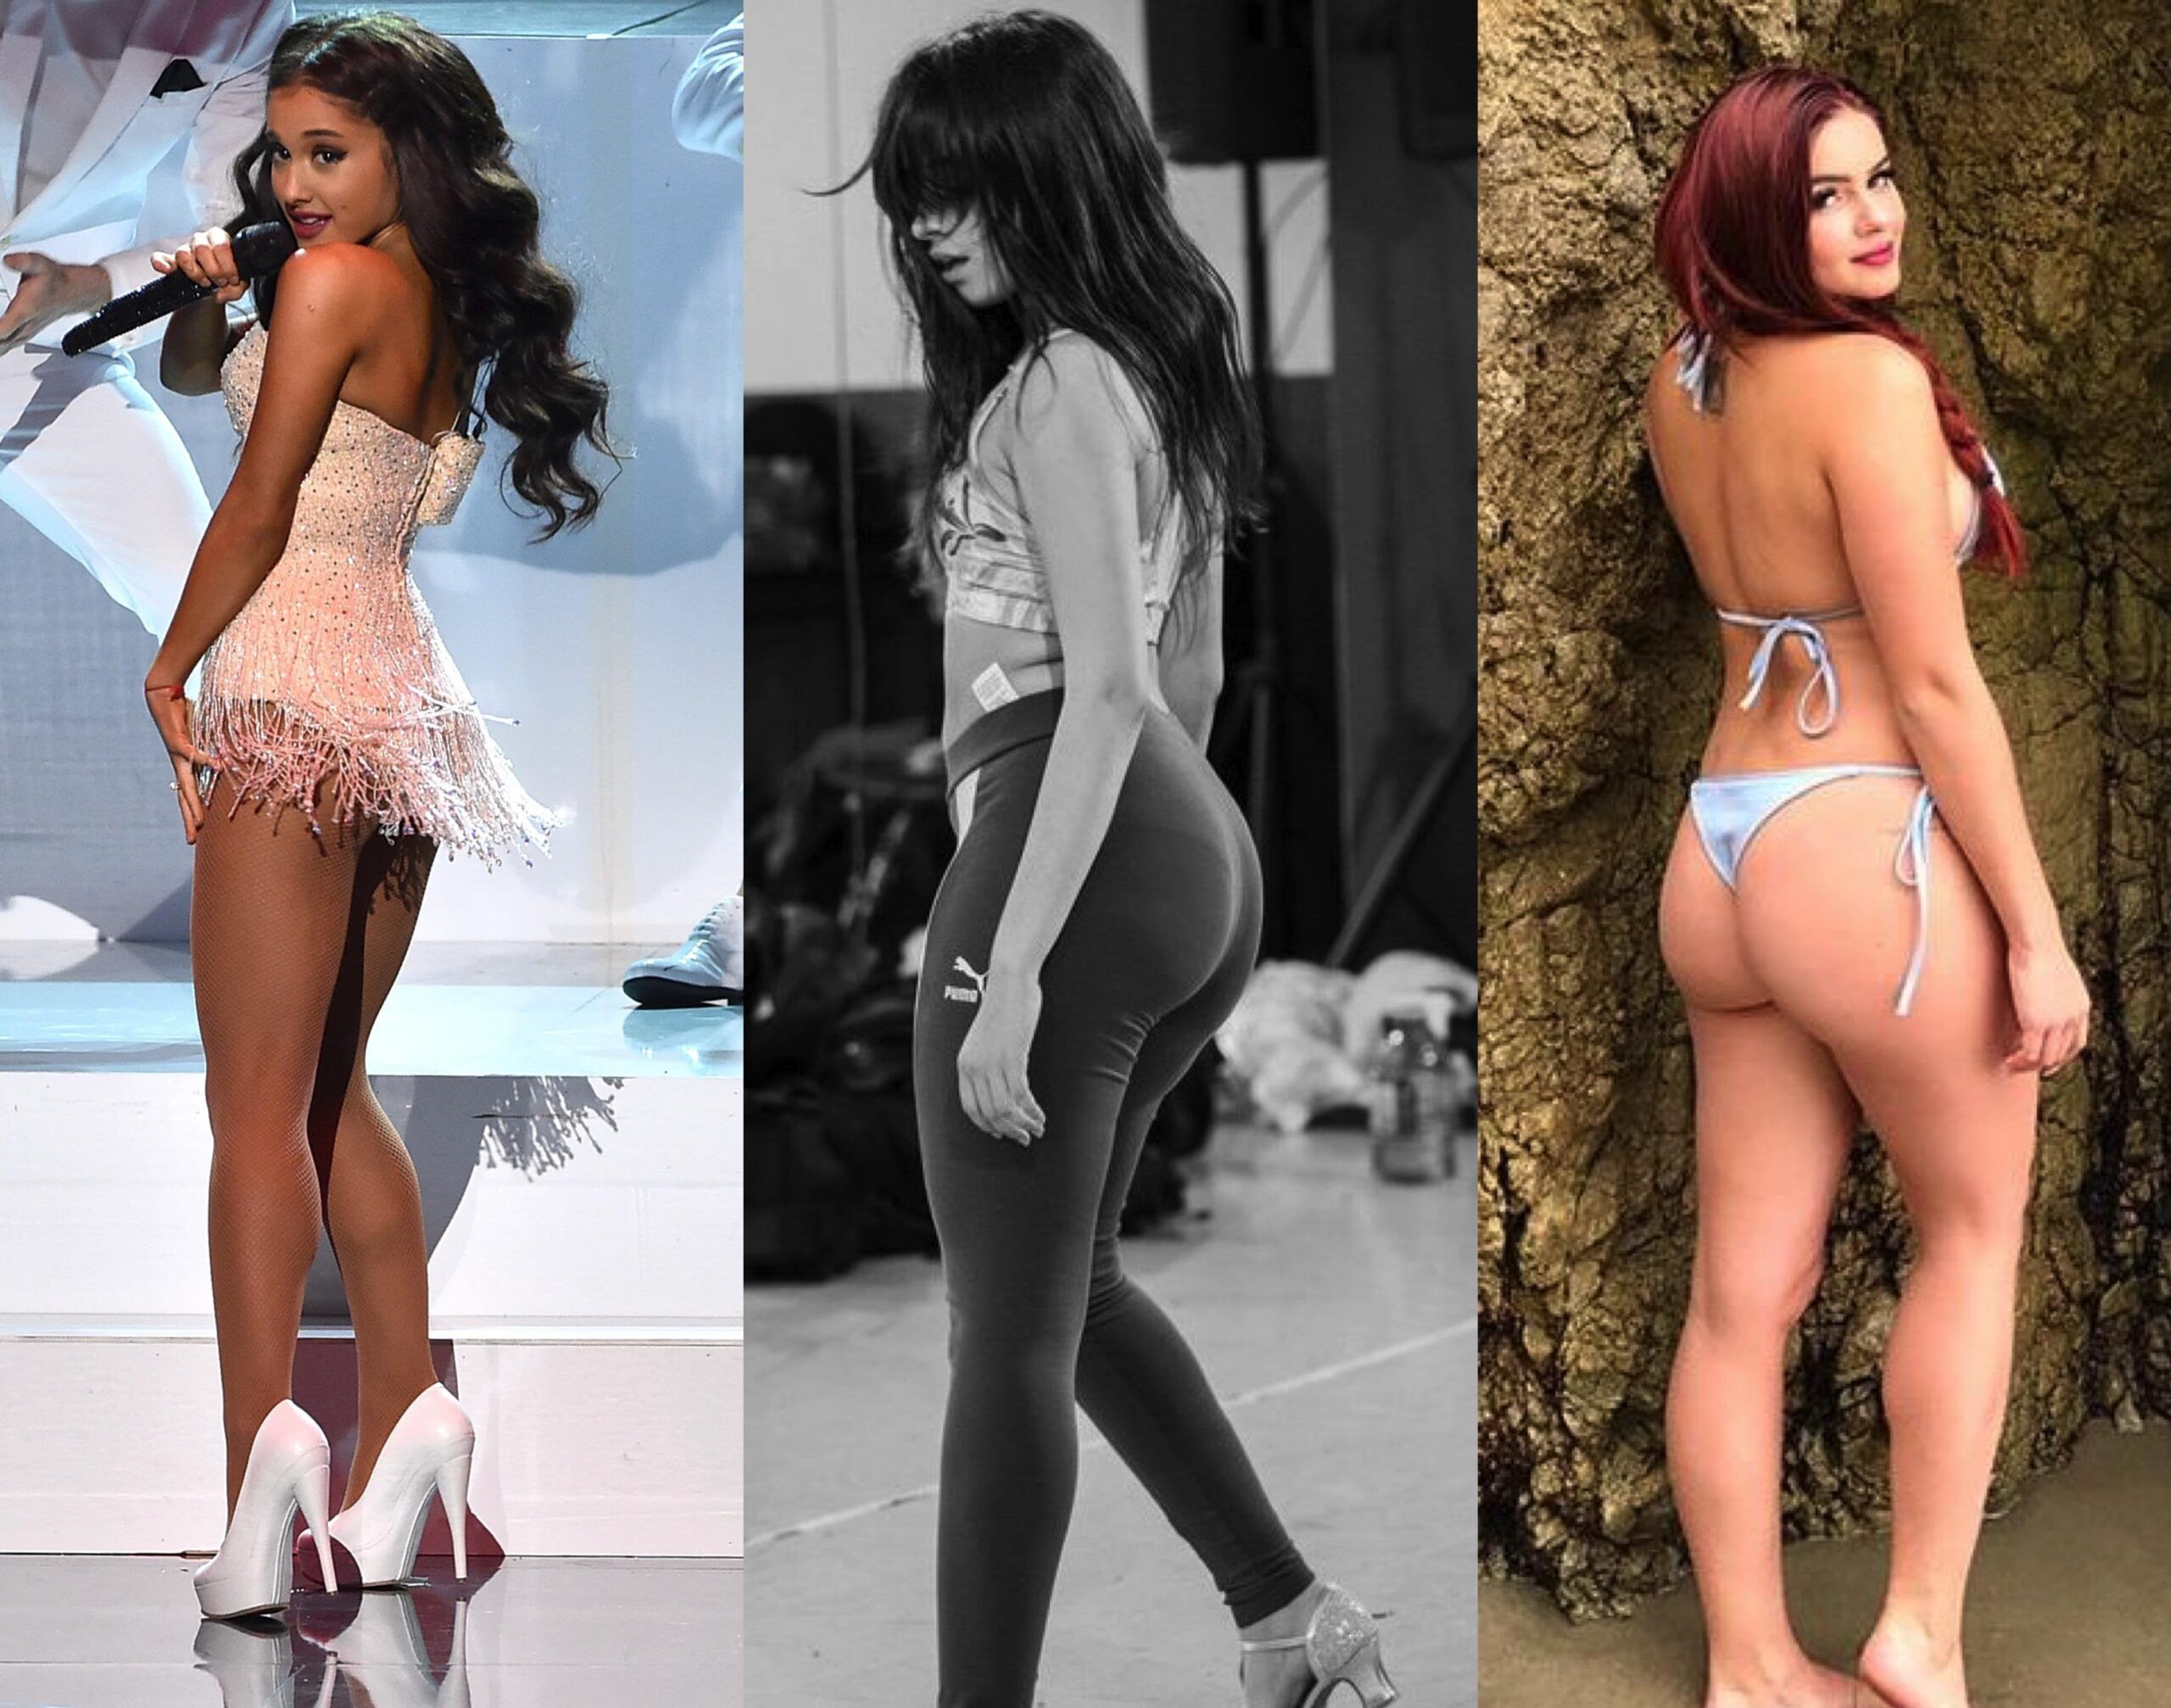 You can only fuck one of these asses Ariana Grande